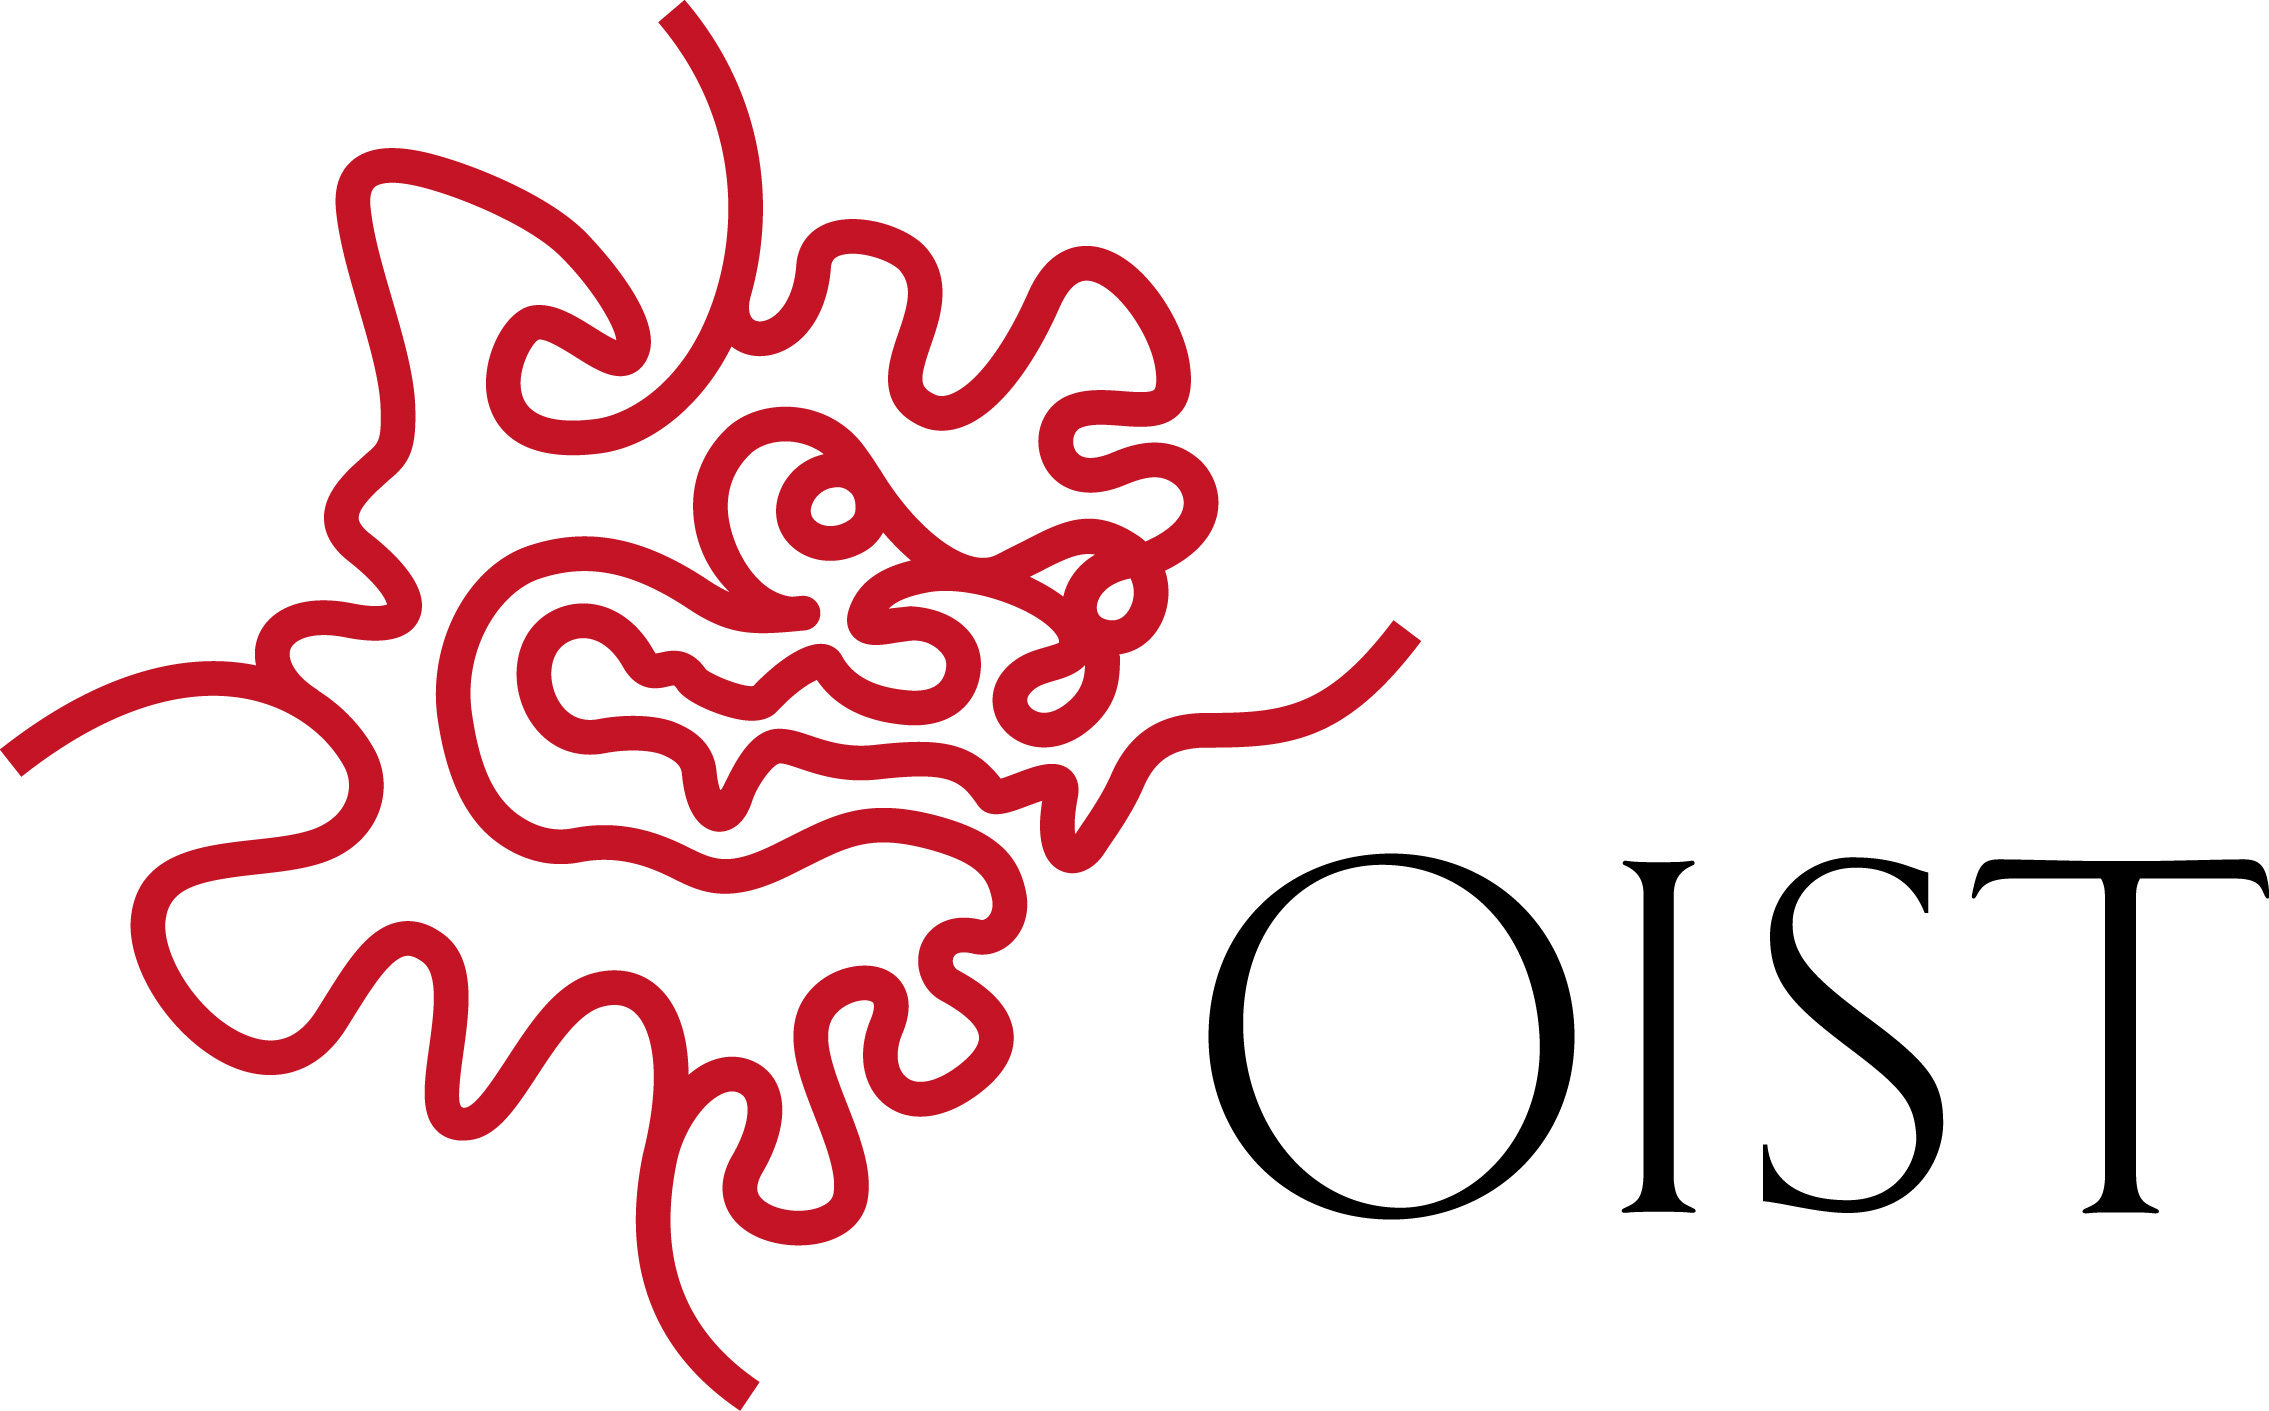 Okinawa Institute of Science and Technology (OIST) logo